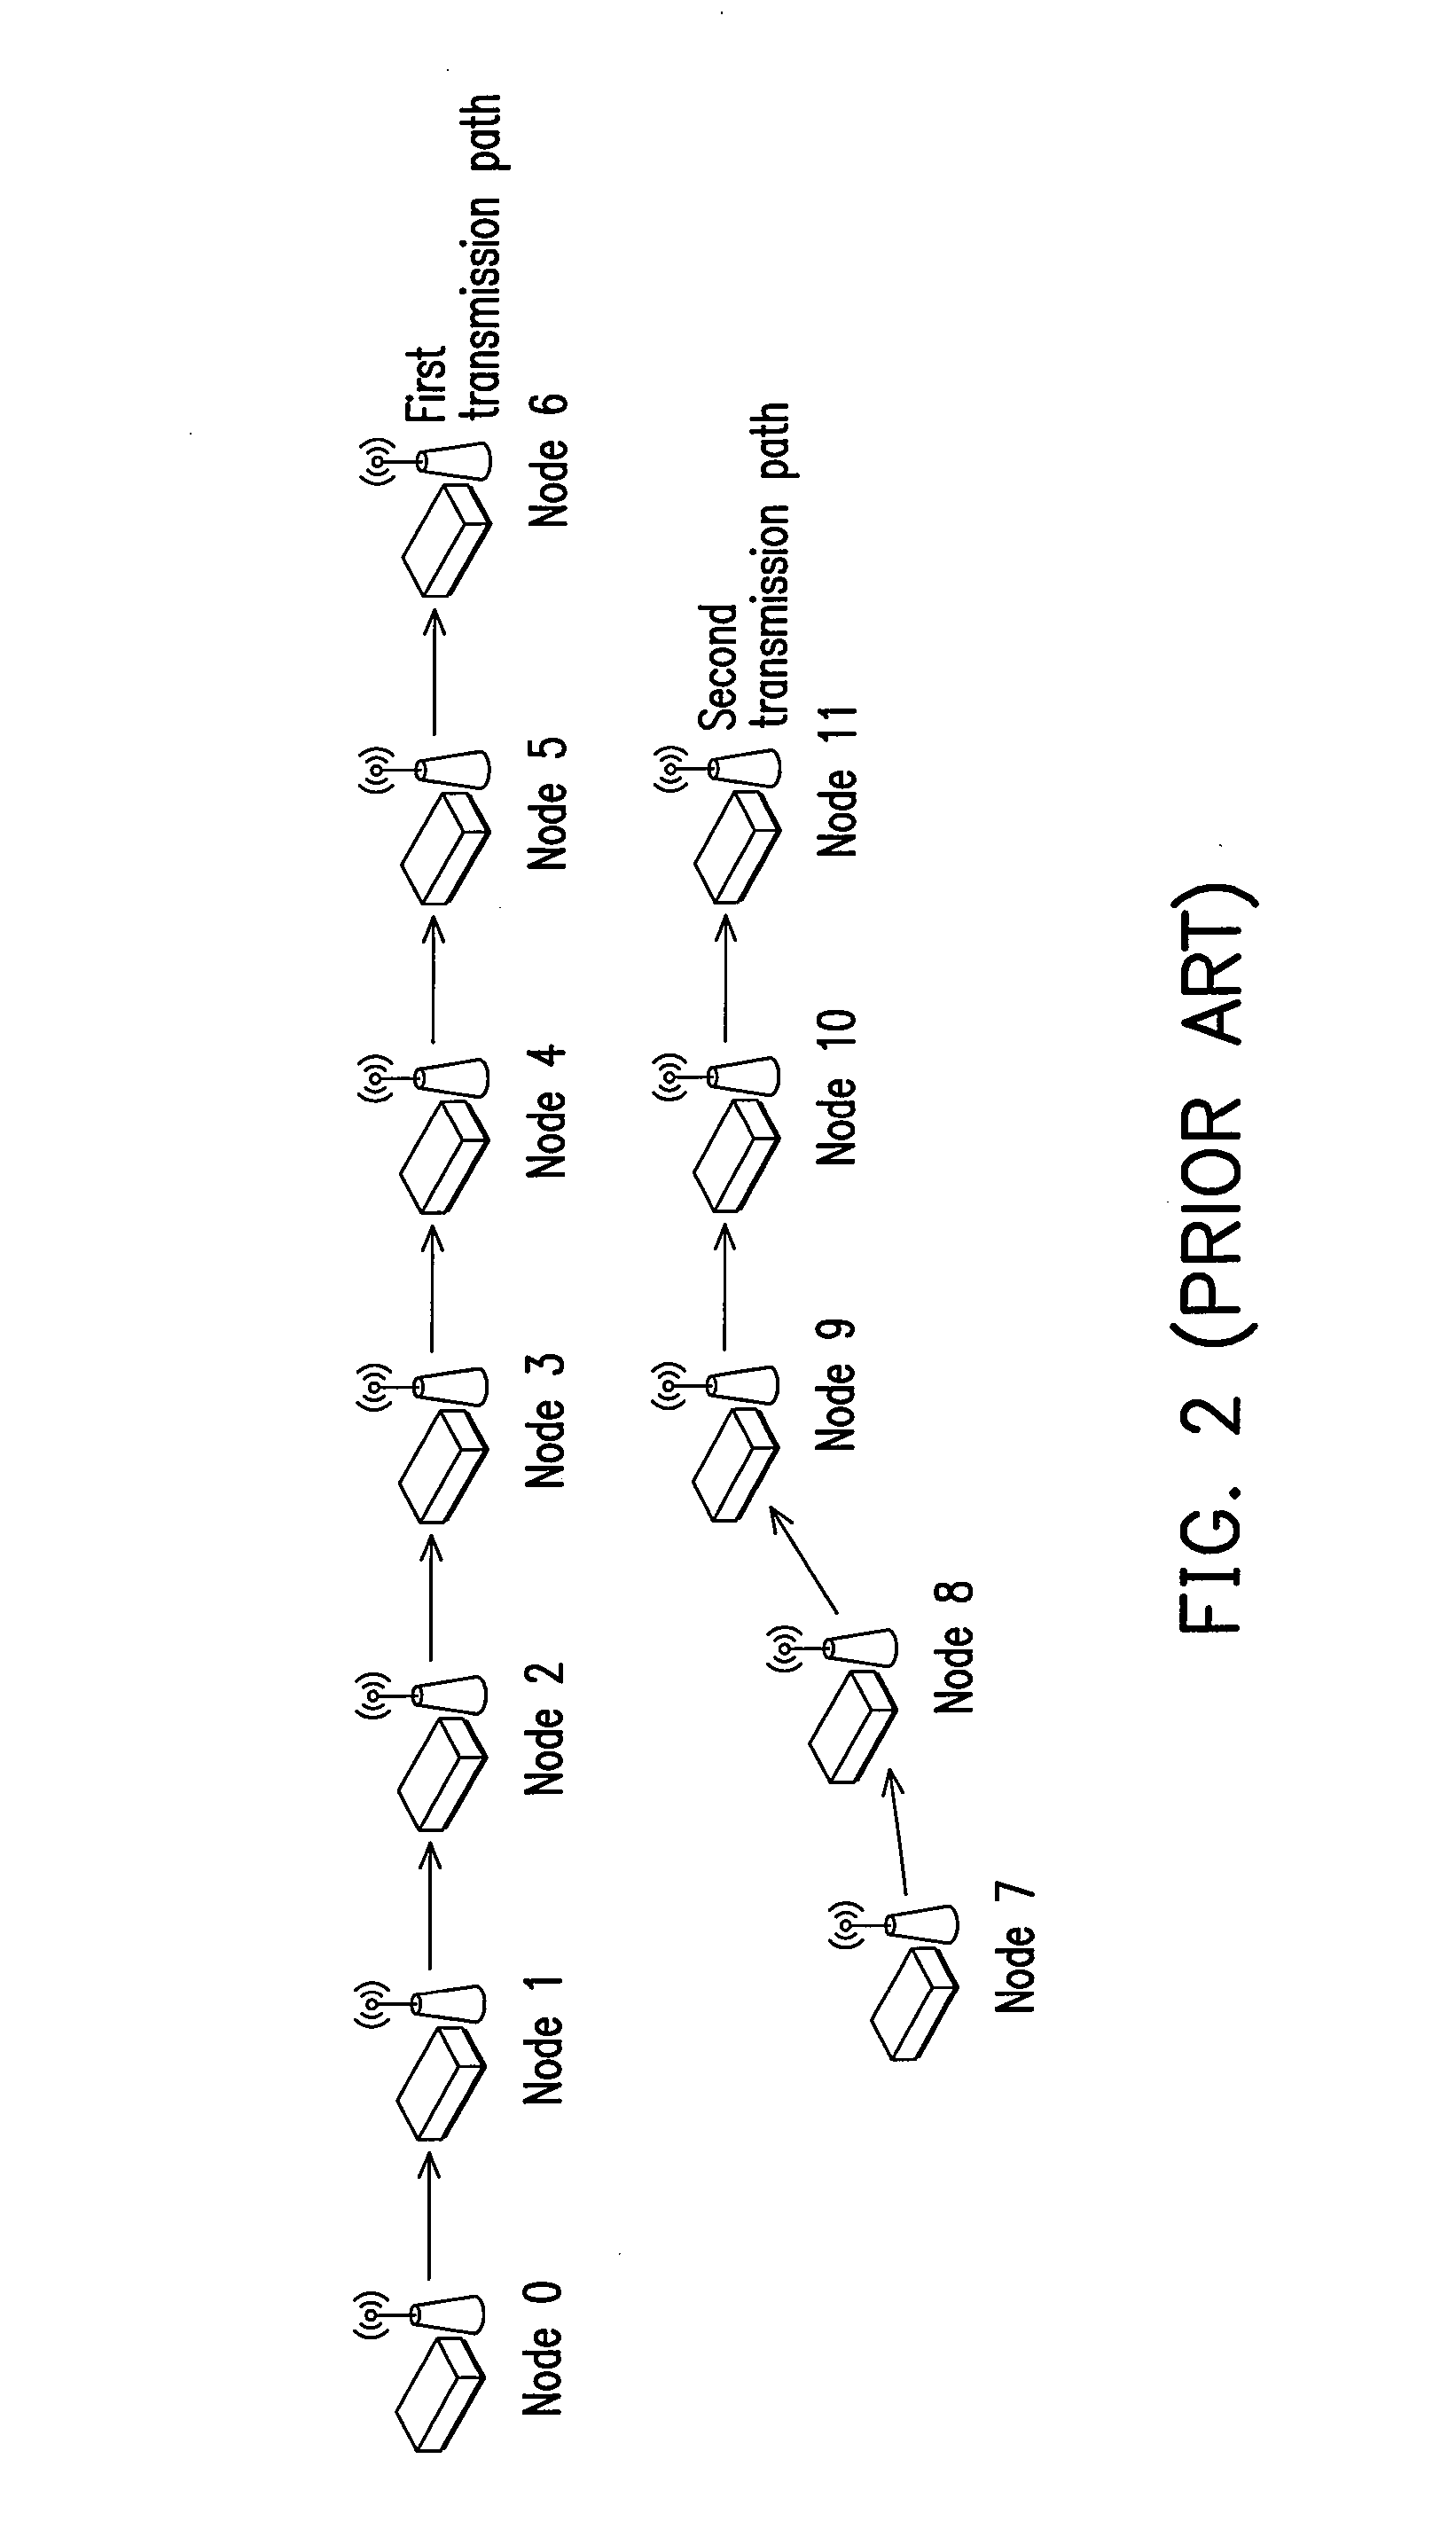 Distributed channel allocation method and wireless mesh network therewith